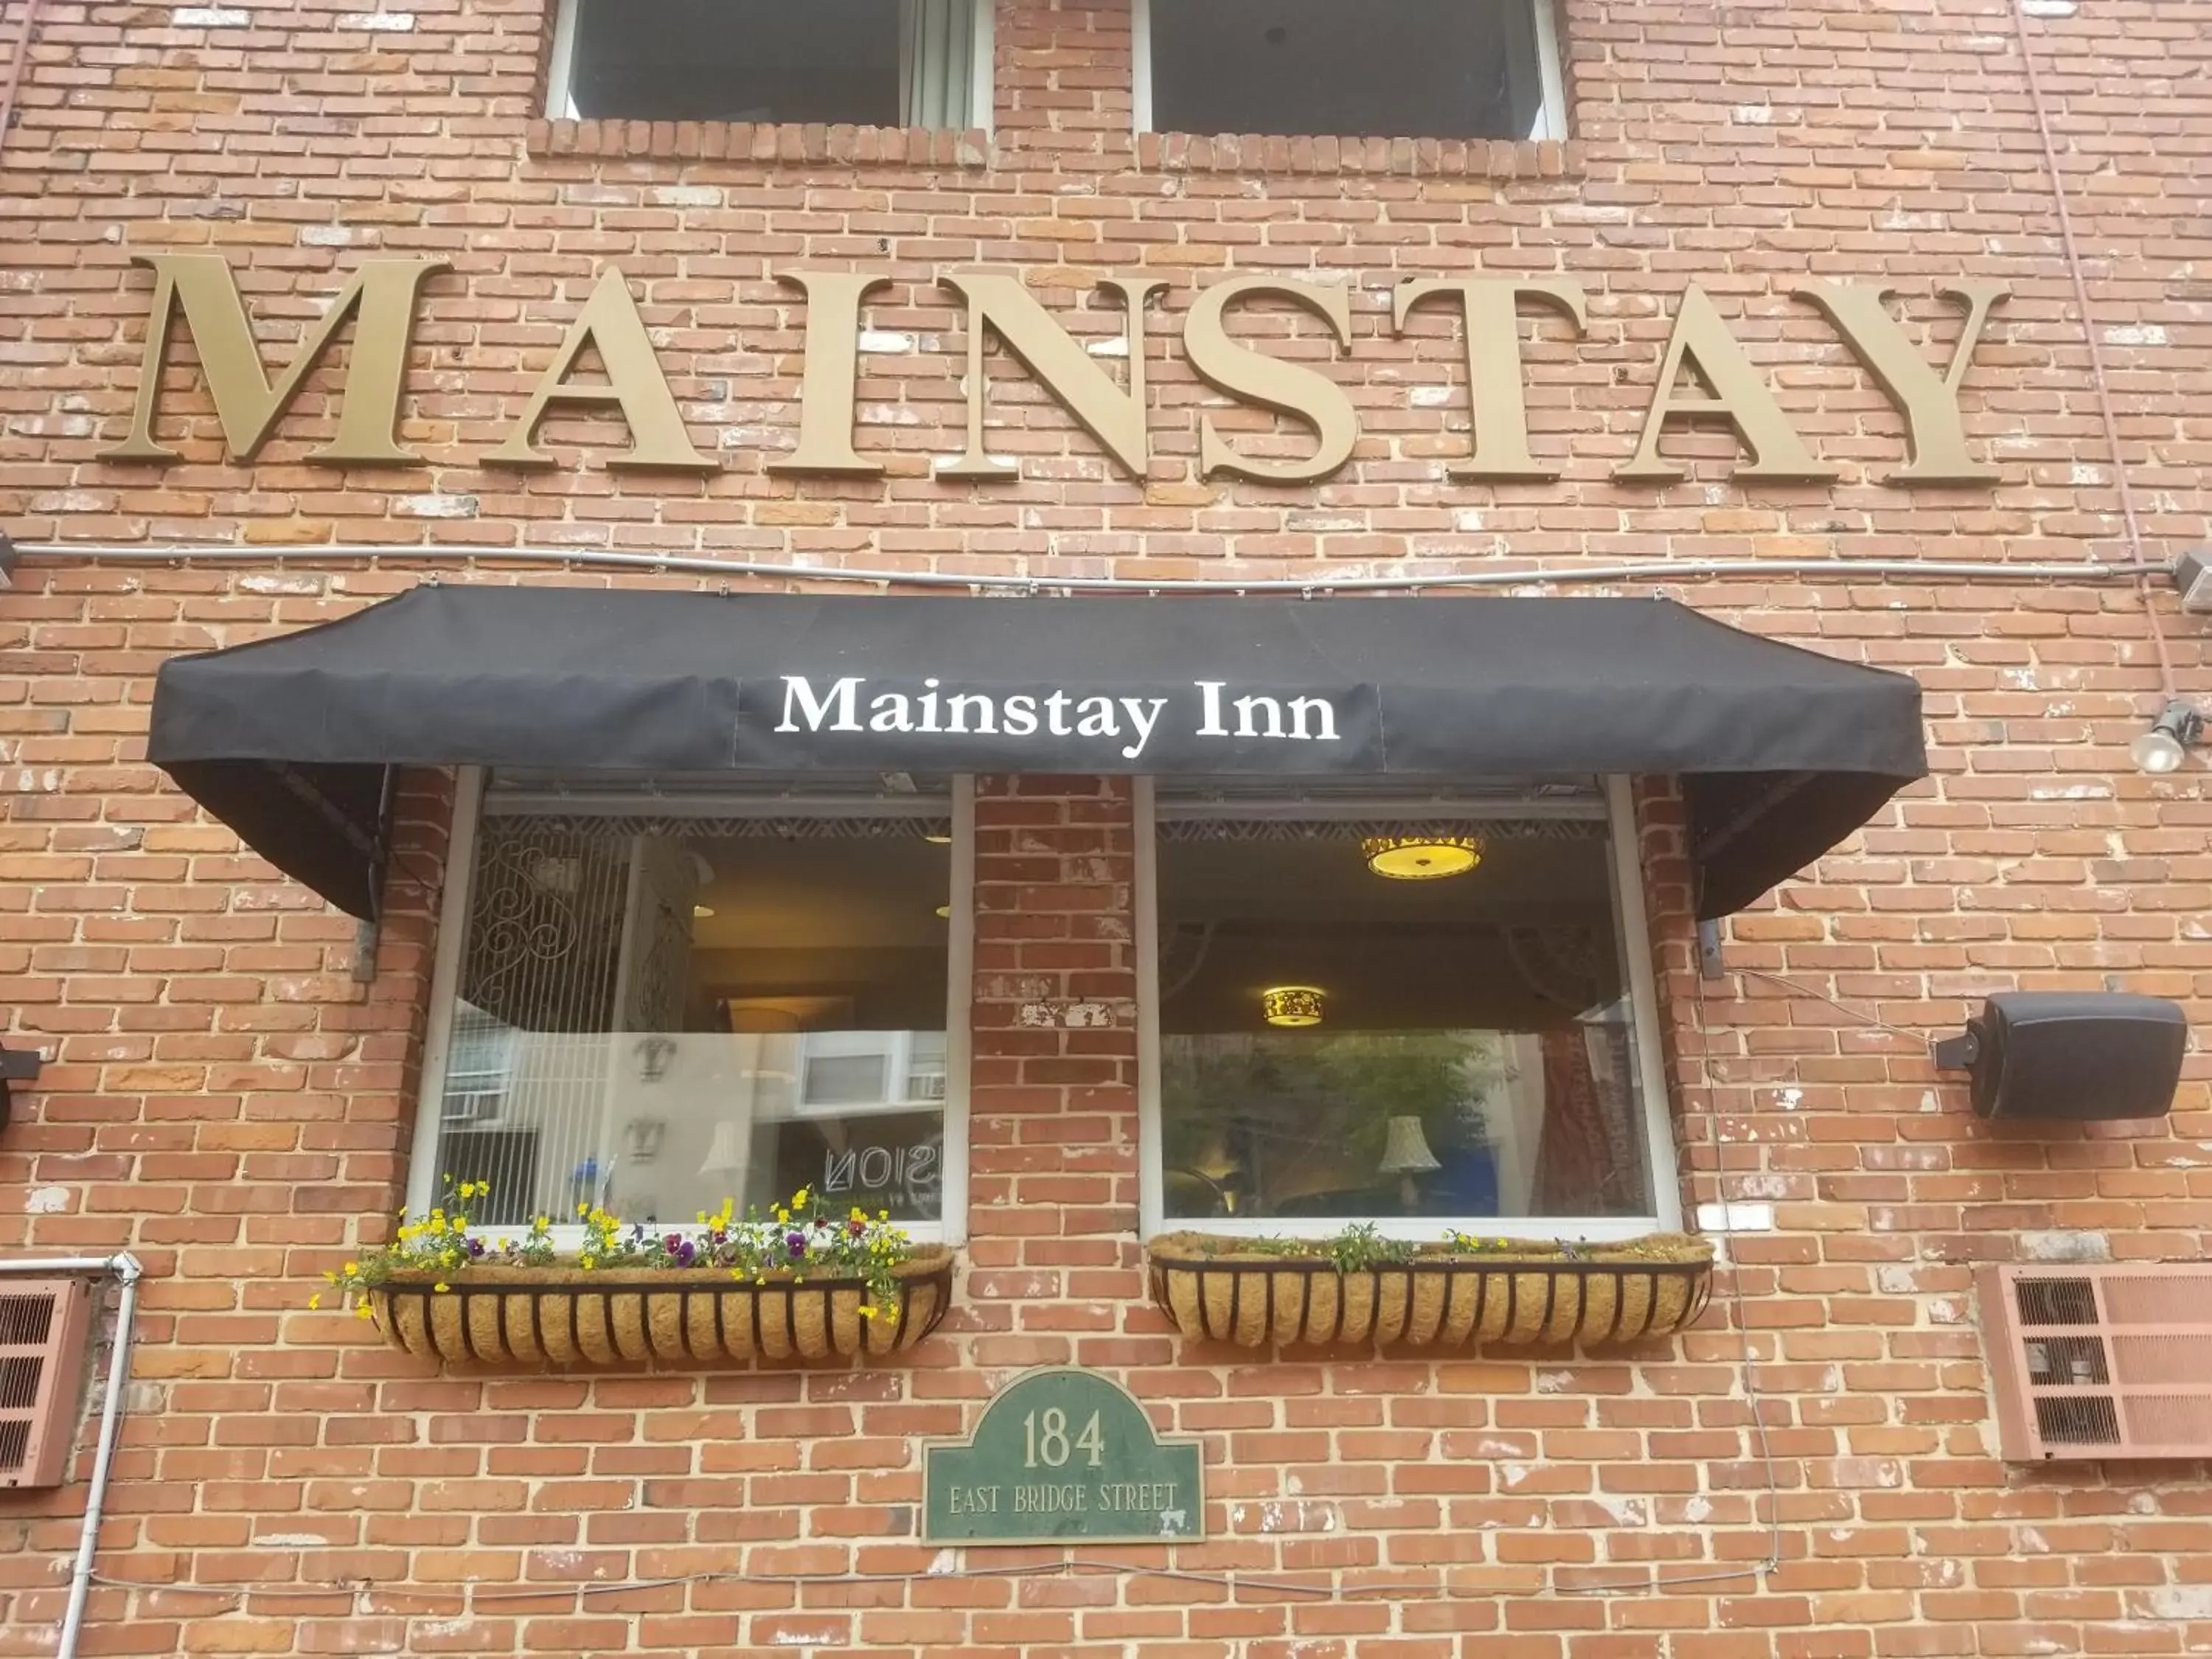 Property logo or sign in Mainstay Inn